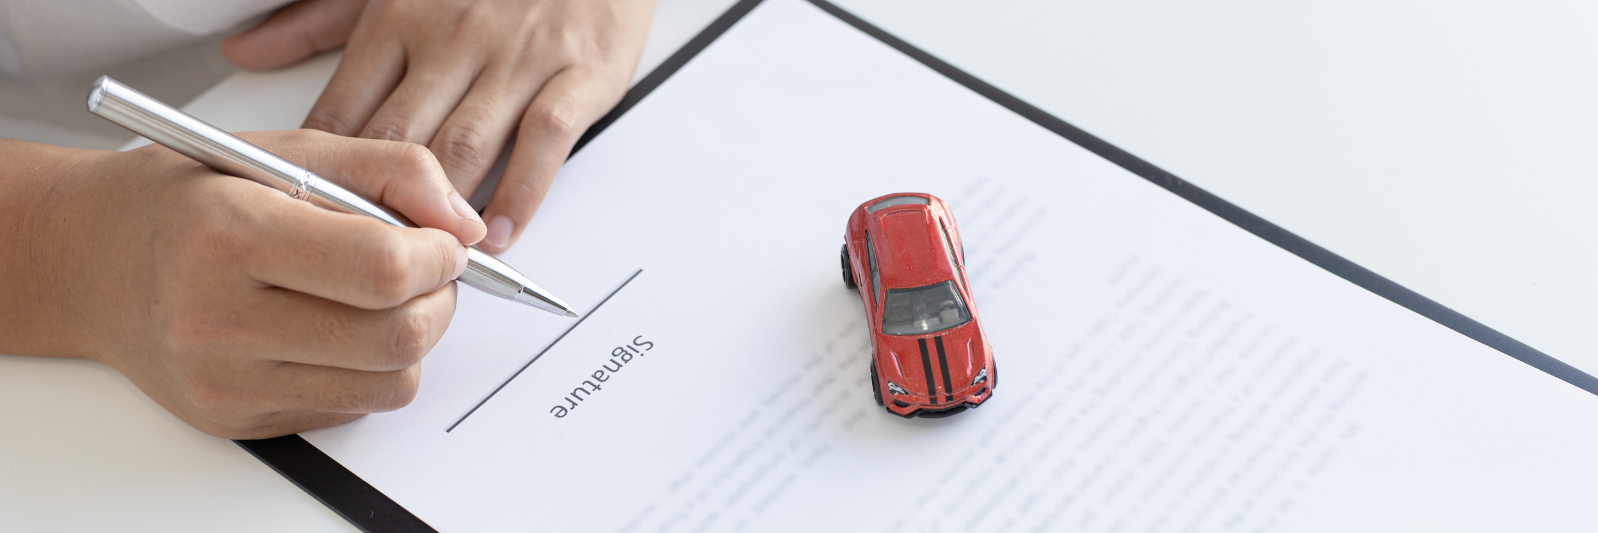 little red toy car on top of white paper